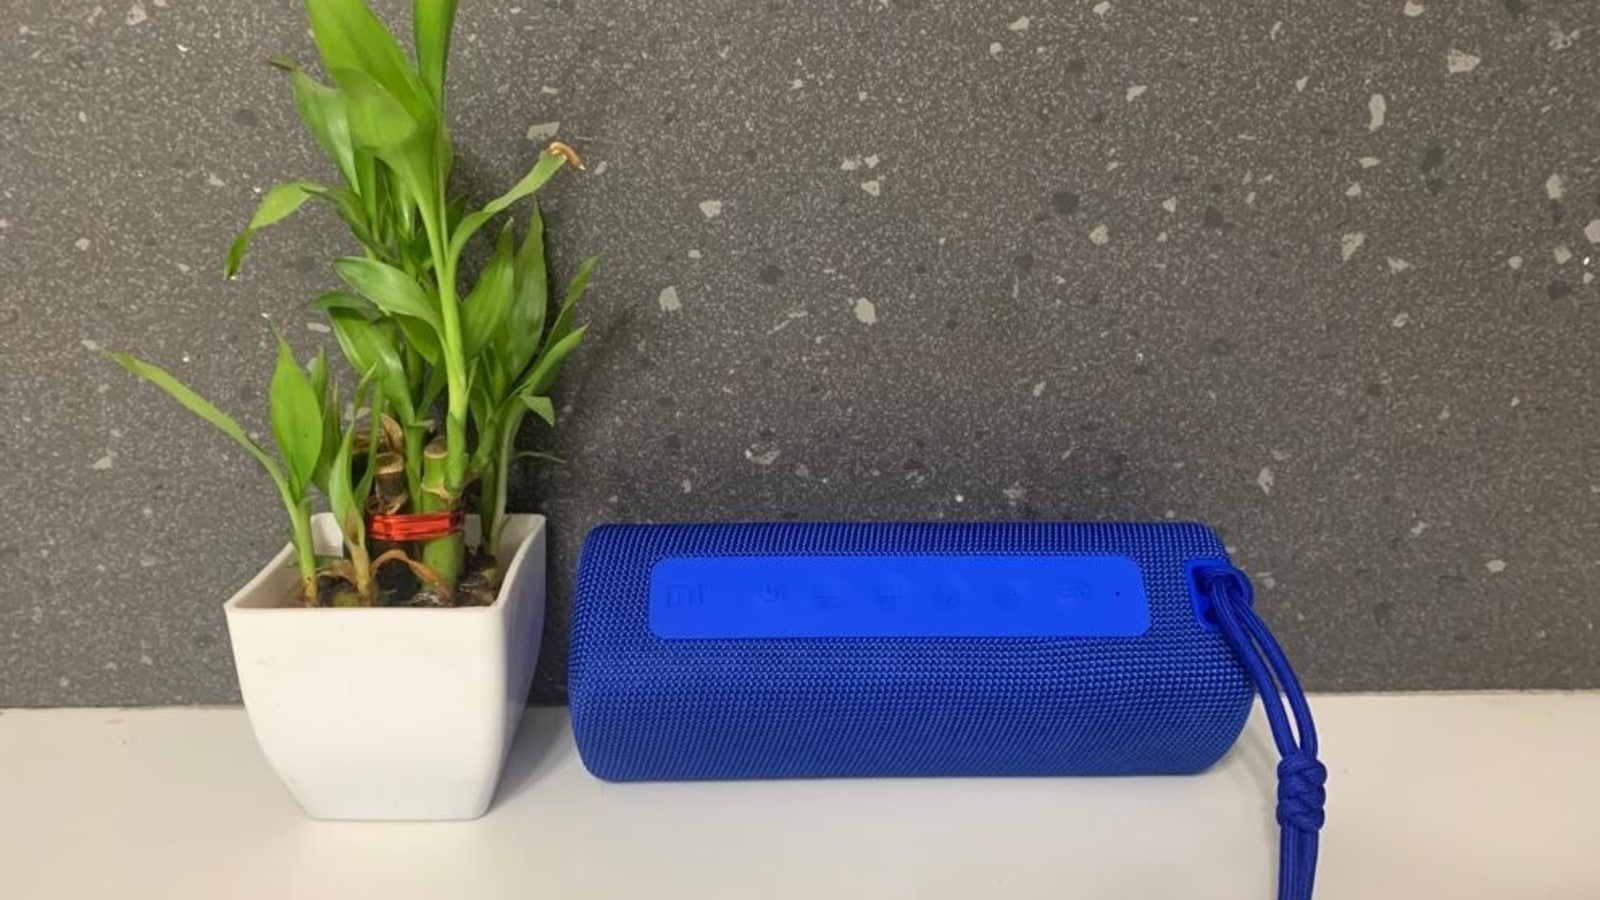 Xiaomi Mi Portable Bluetooth Speaker (16W) - On a par with the greats! 🫡 -  Unboxing and review 